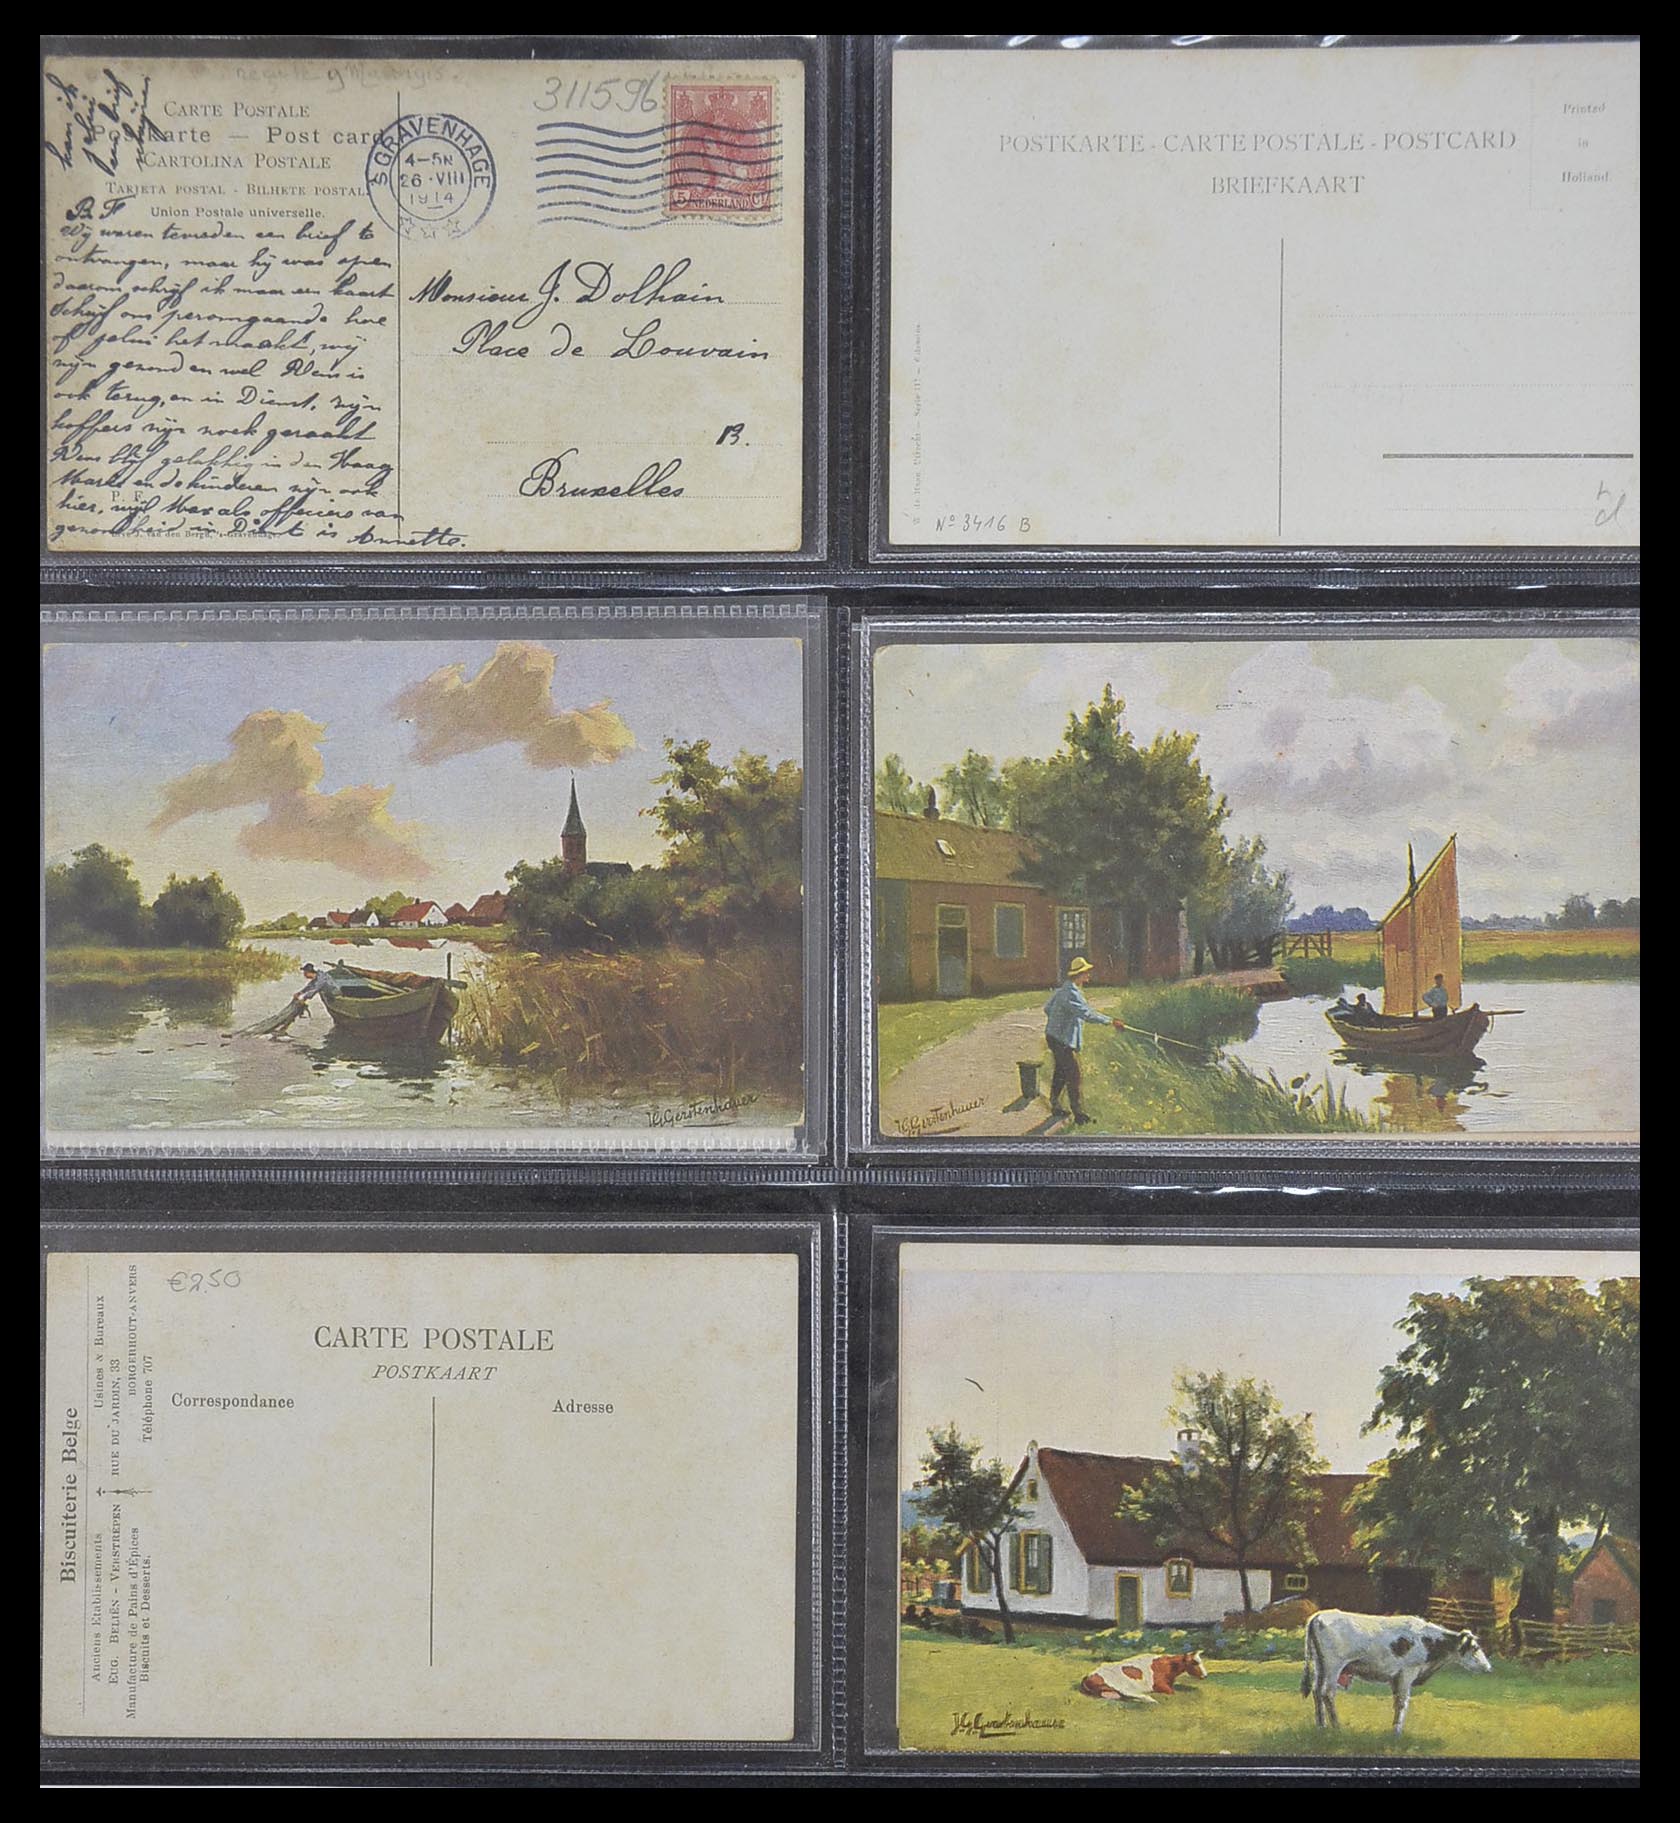 33928 047 - Stamp collection 33928 Netherlands picture postcards 1910-1930.